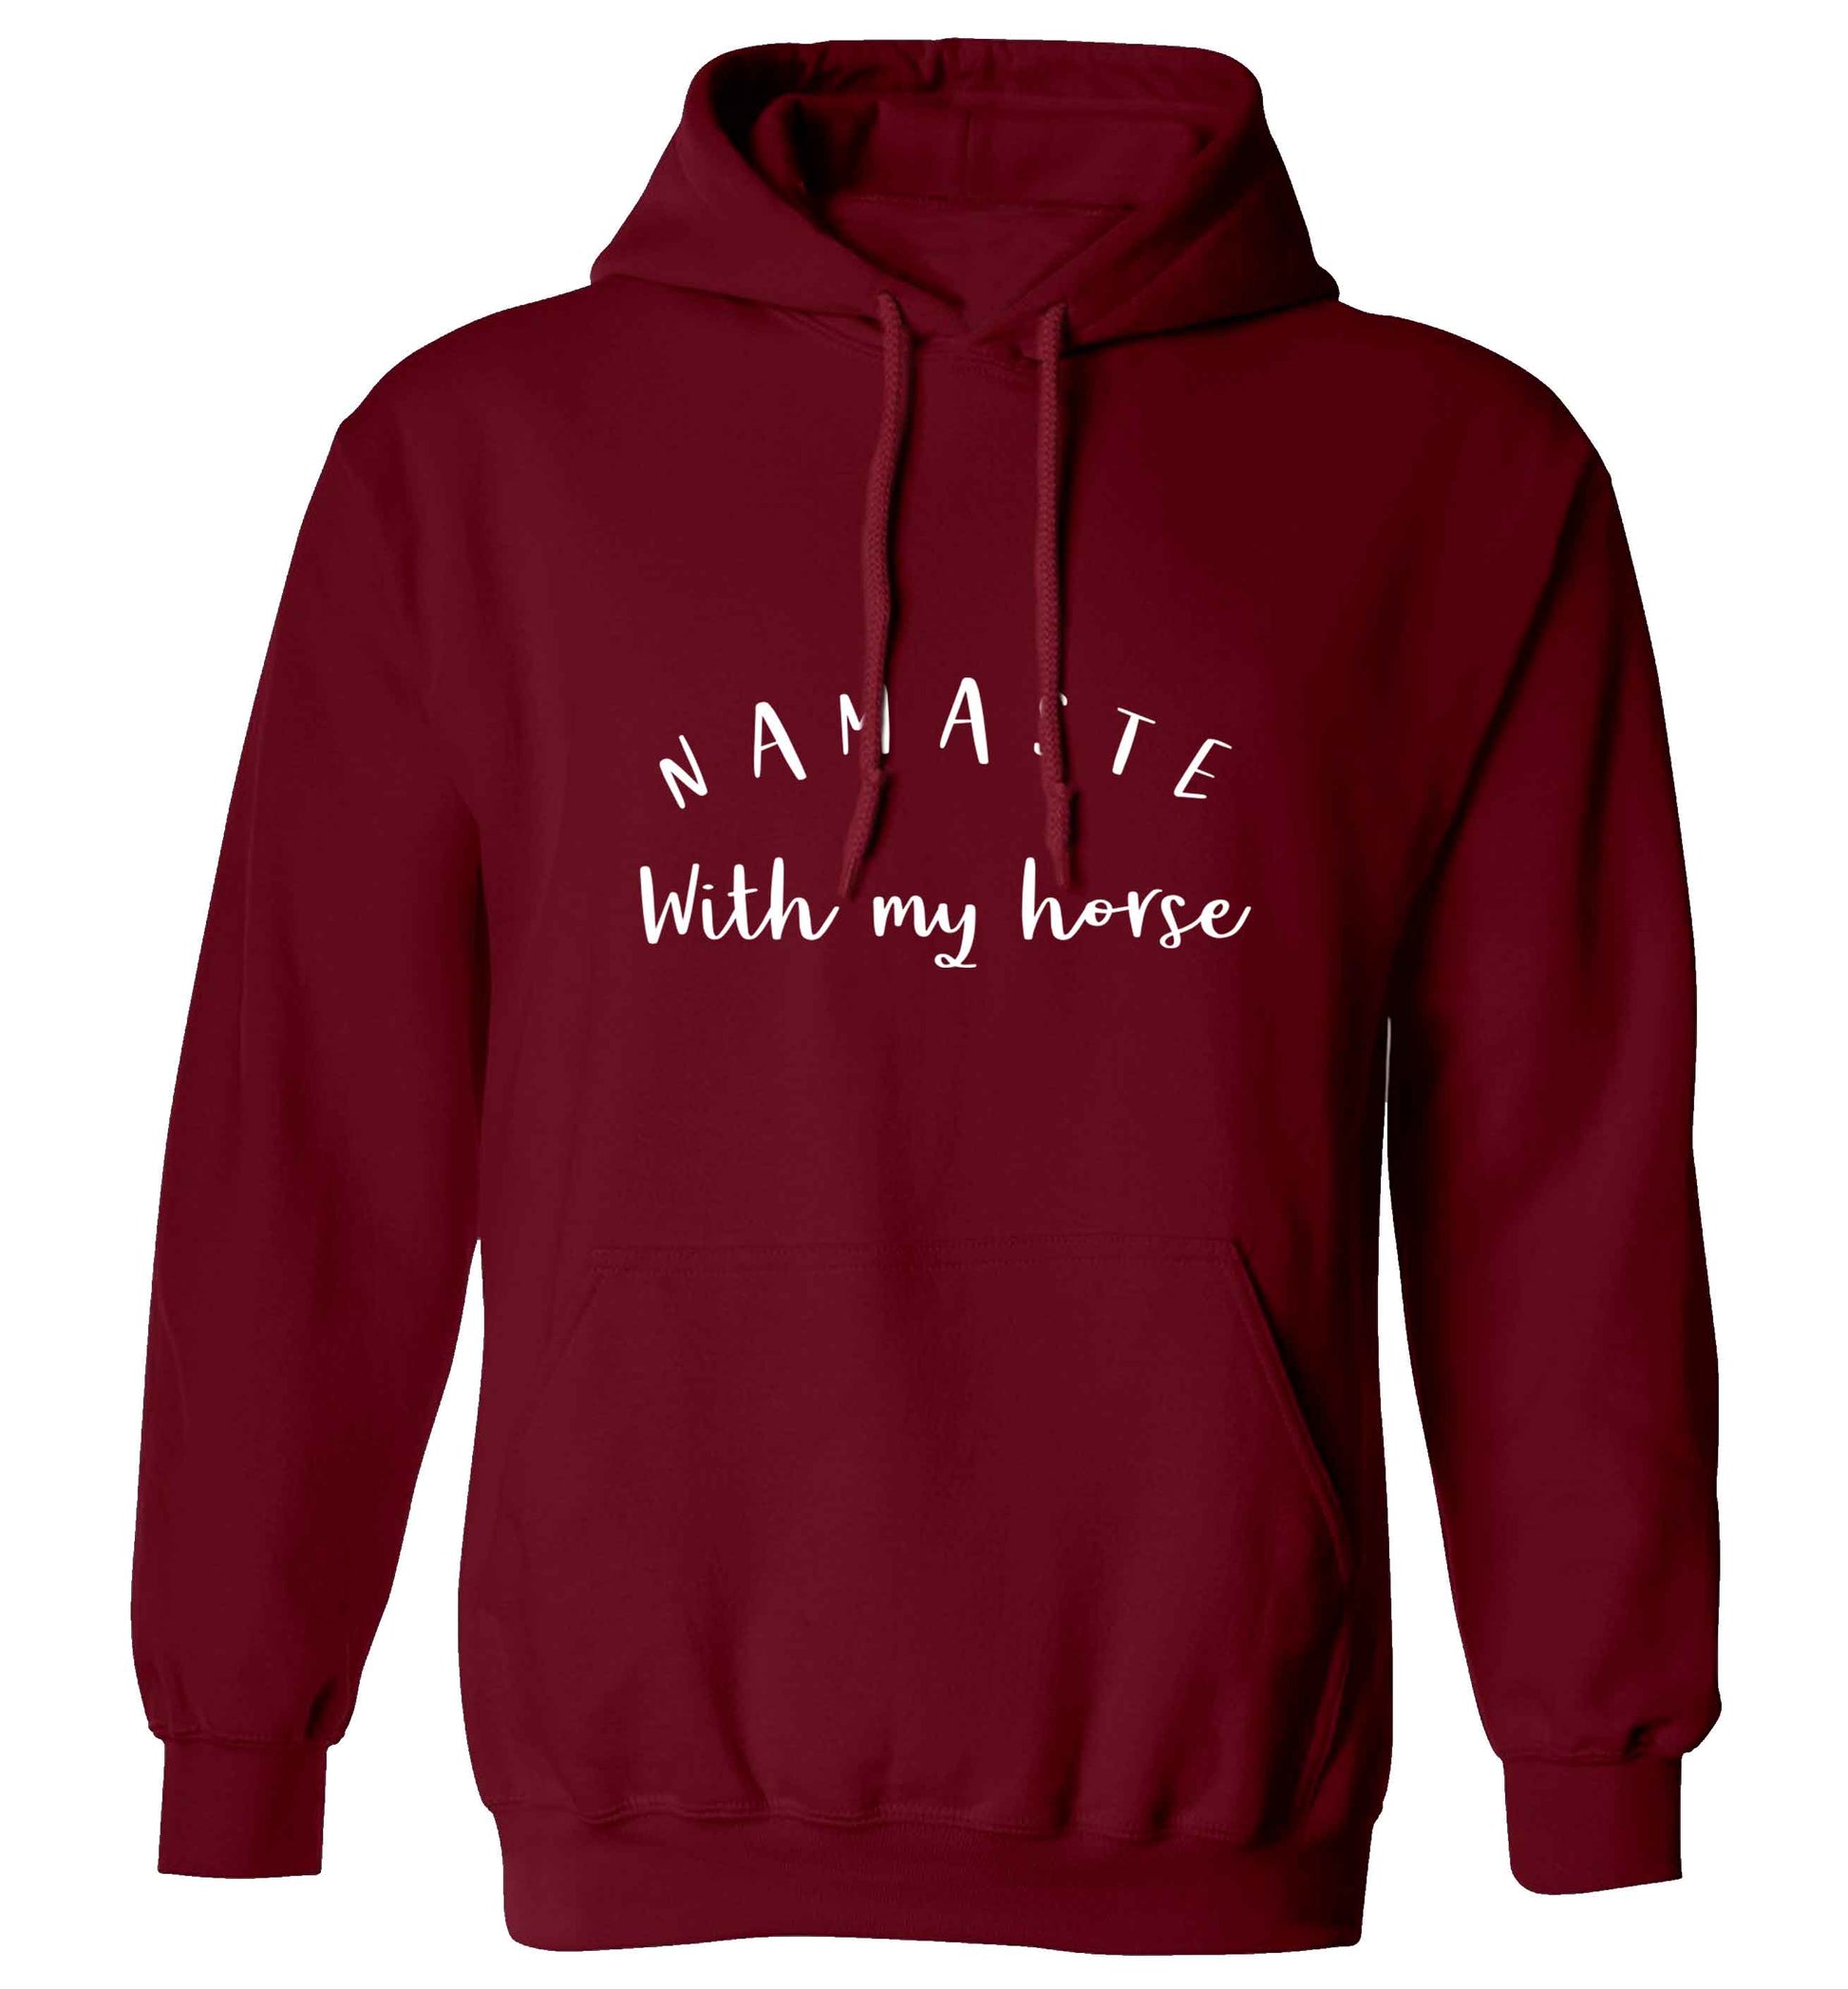 Namaste with my horse adults unisex maroon hoodie 2XL